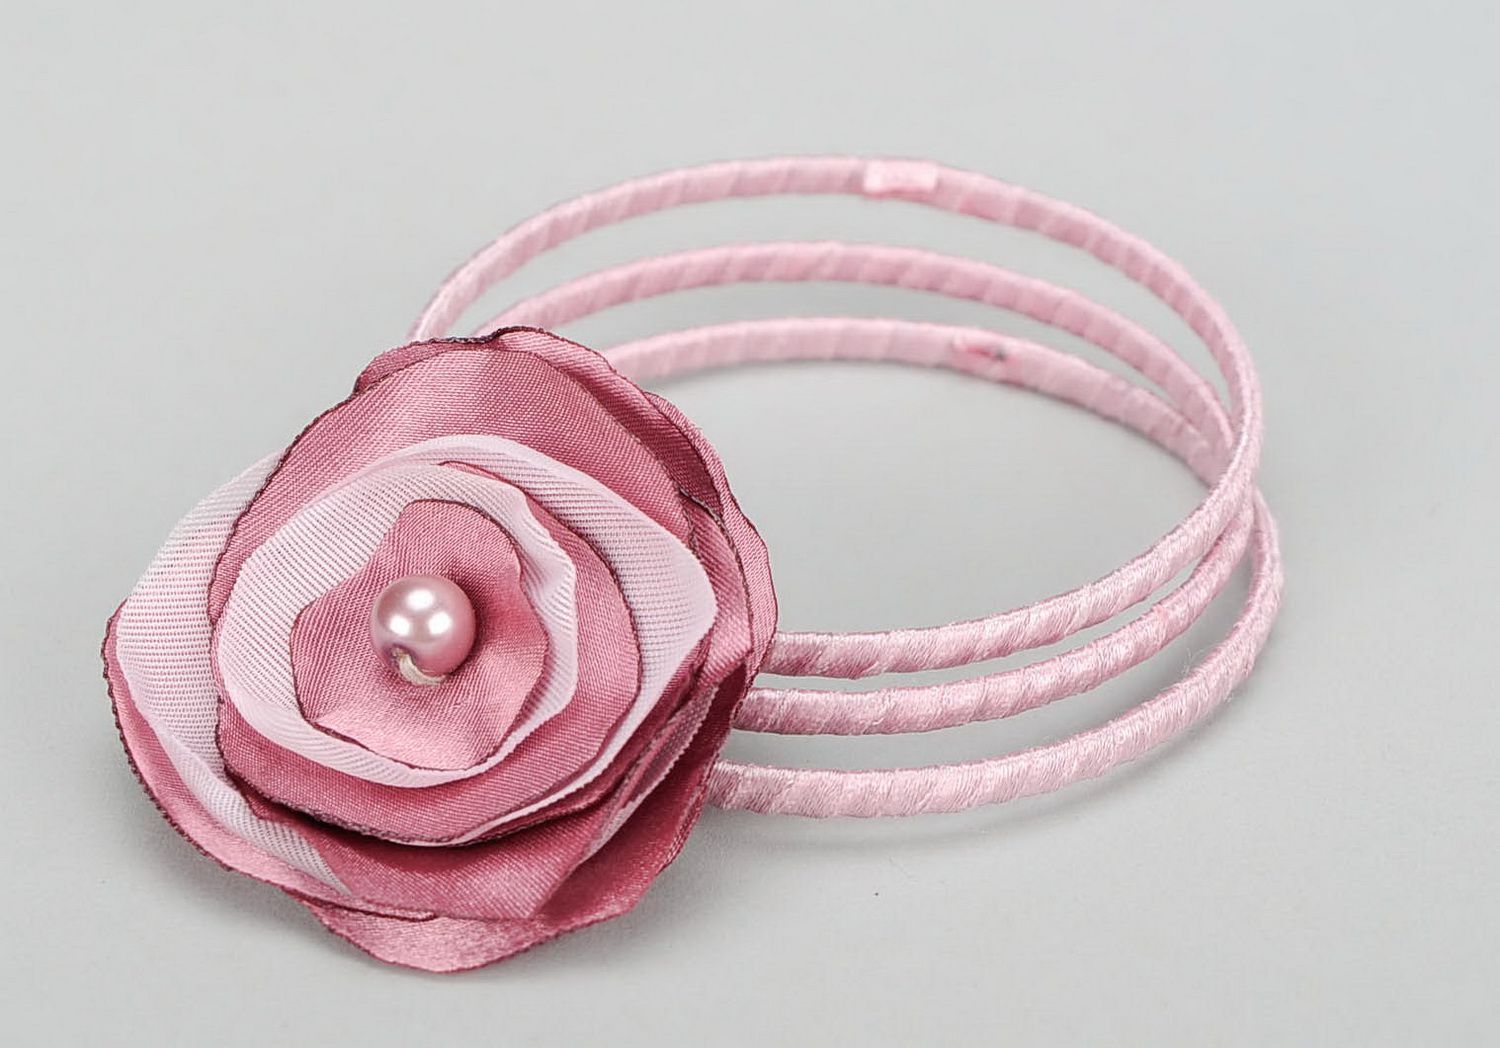 Bracelet with flower made of organza and satin Snowy plum photo 1